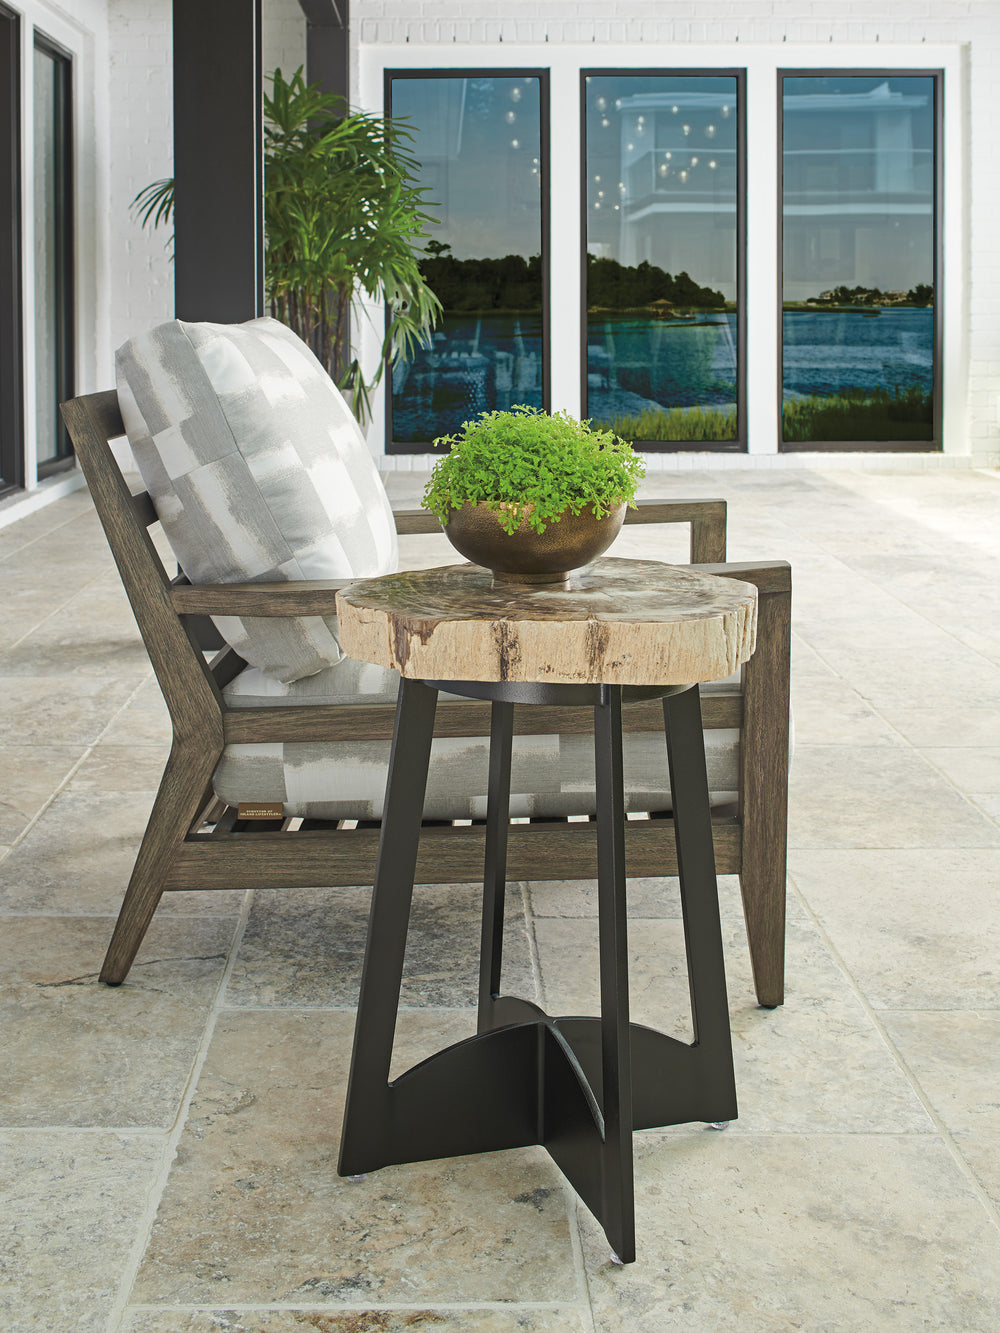 American Home Furniture | Tommy Bahama Outdoor  - Alfresco Living Petrified Wood Table